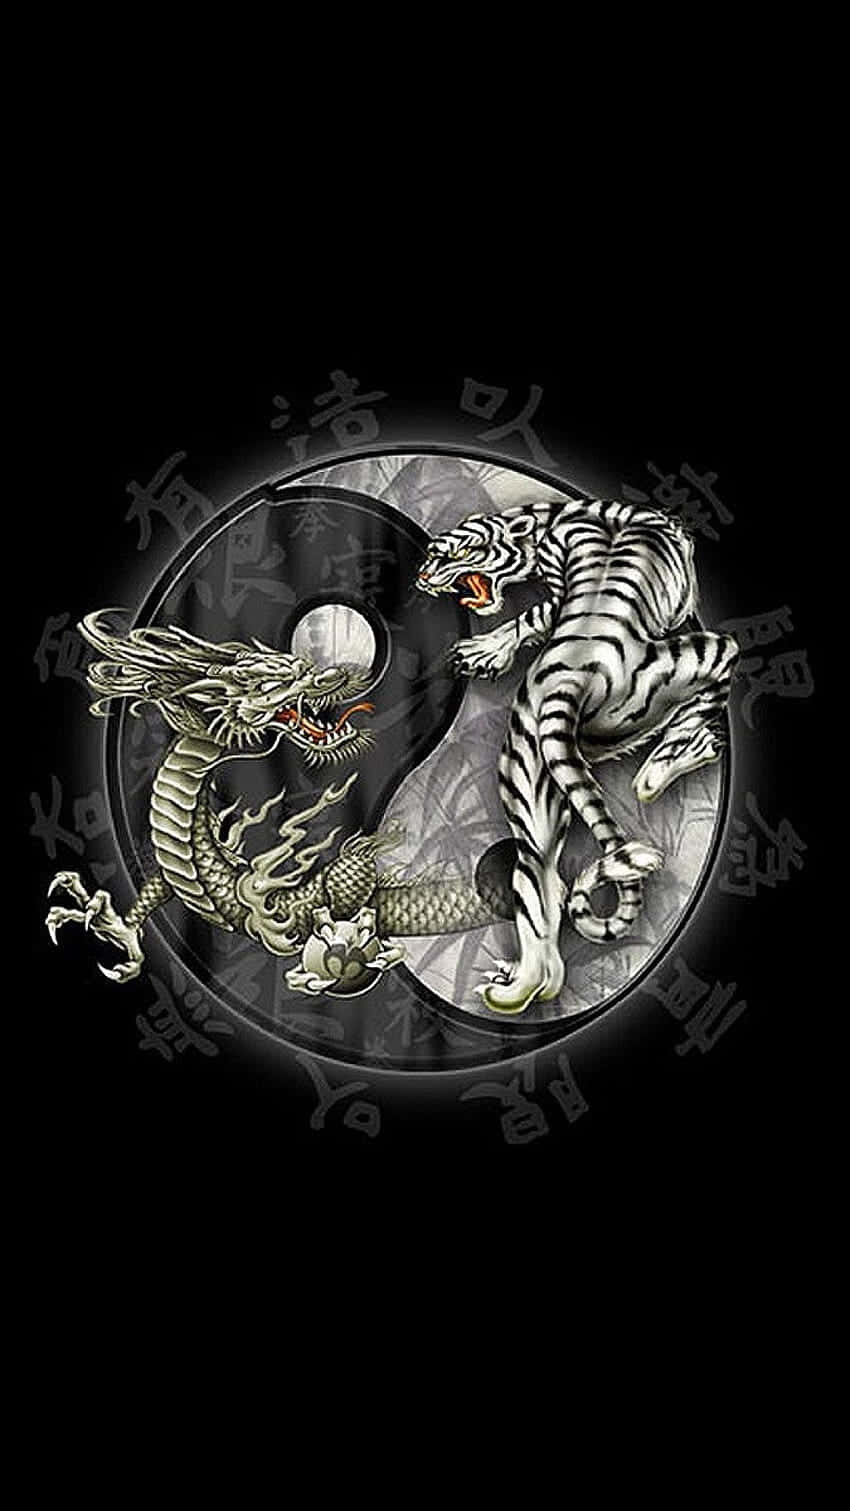 Ying and Yang - Two Opposing Forces